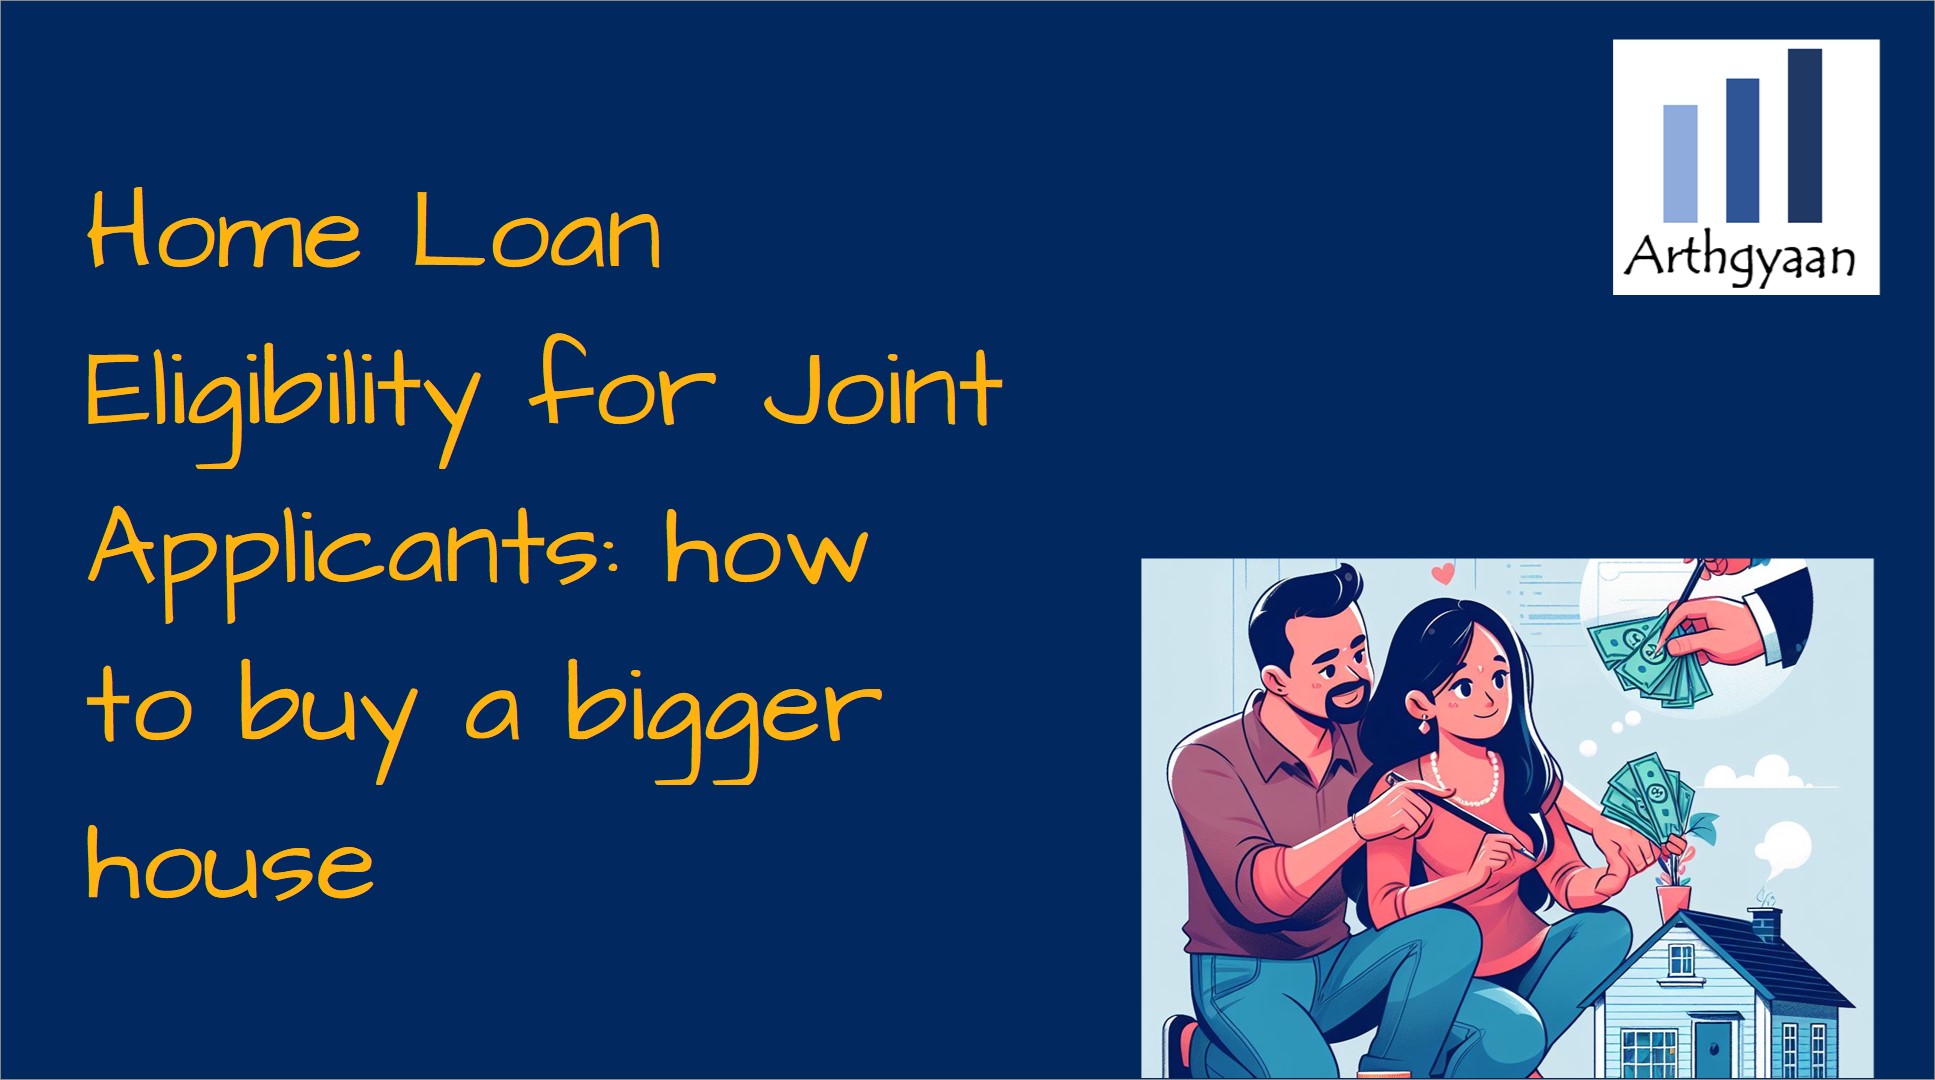 Home Loan Eligibility for Joint Applicants: how to buy a bigger house